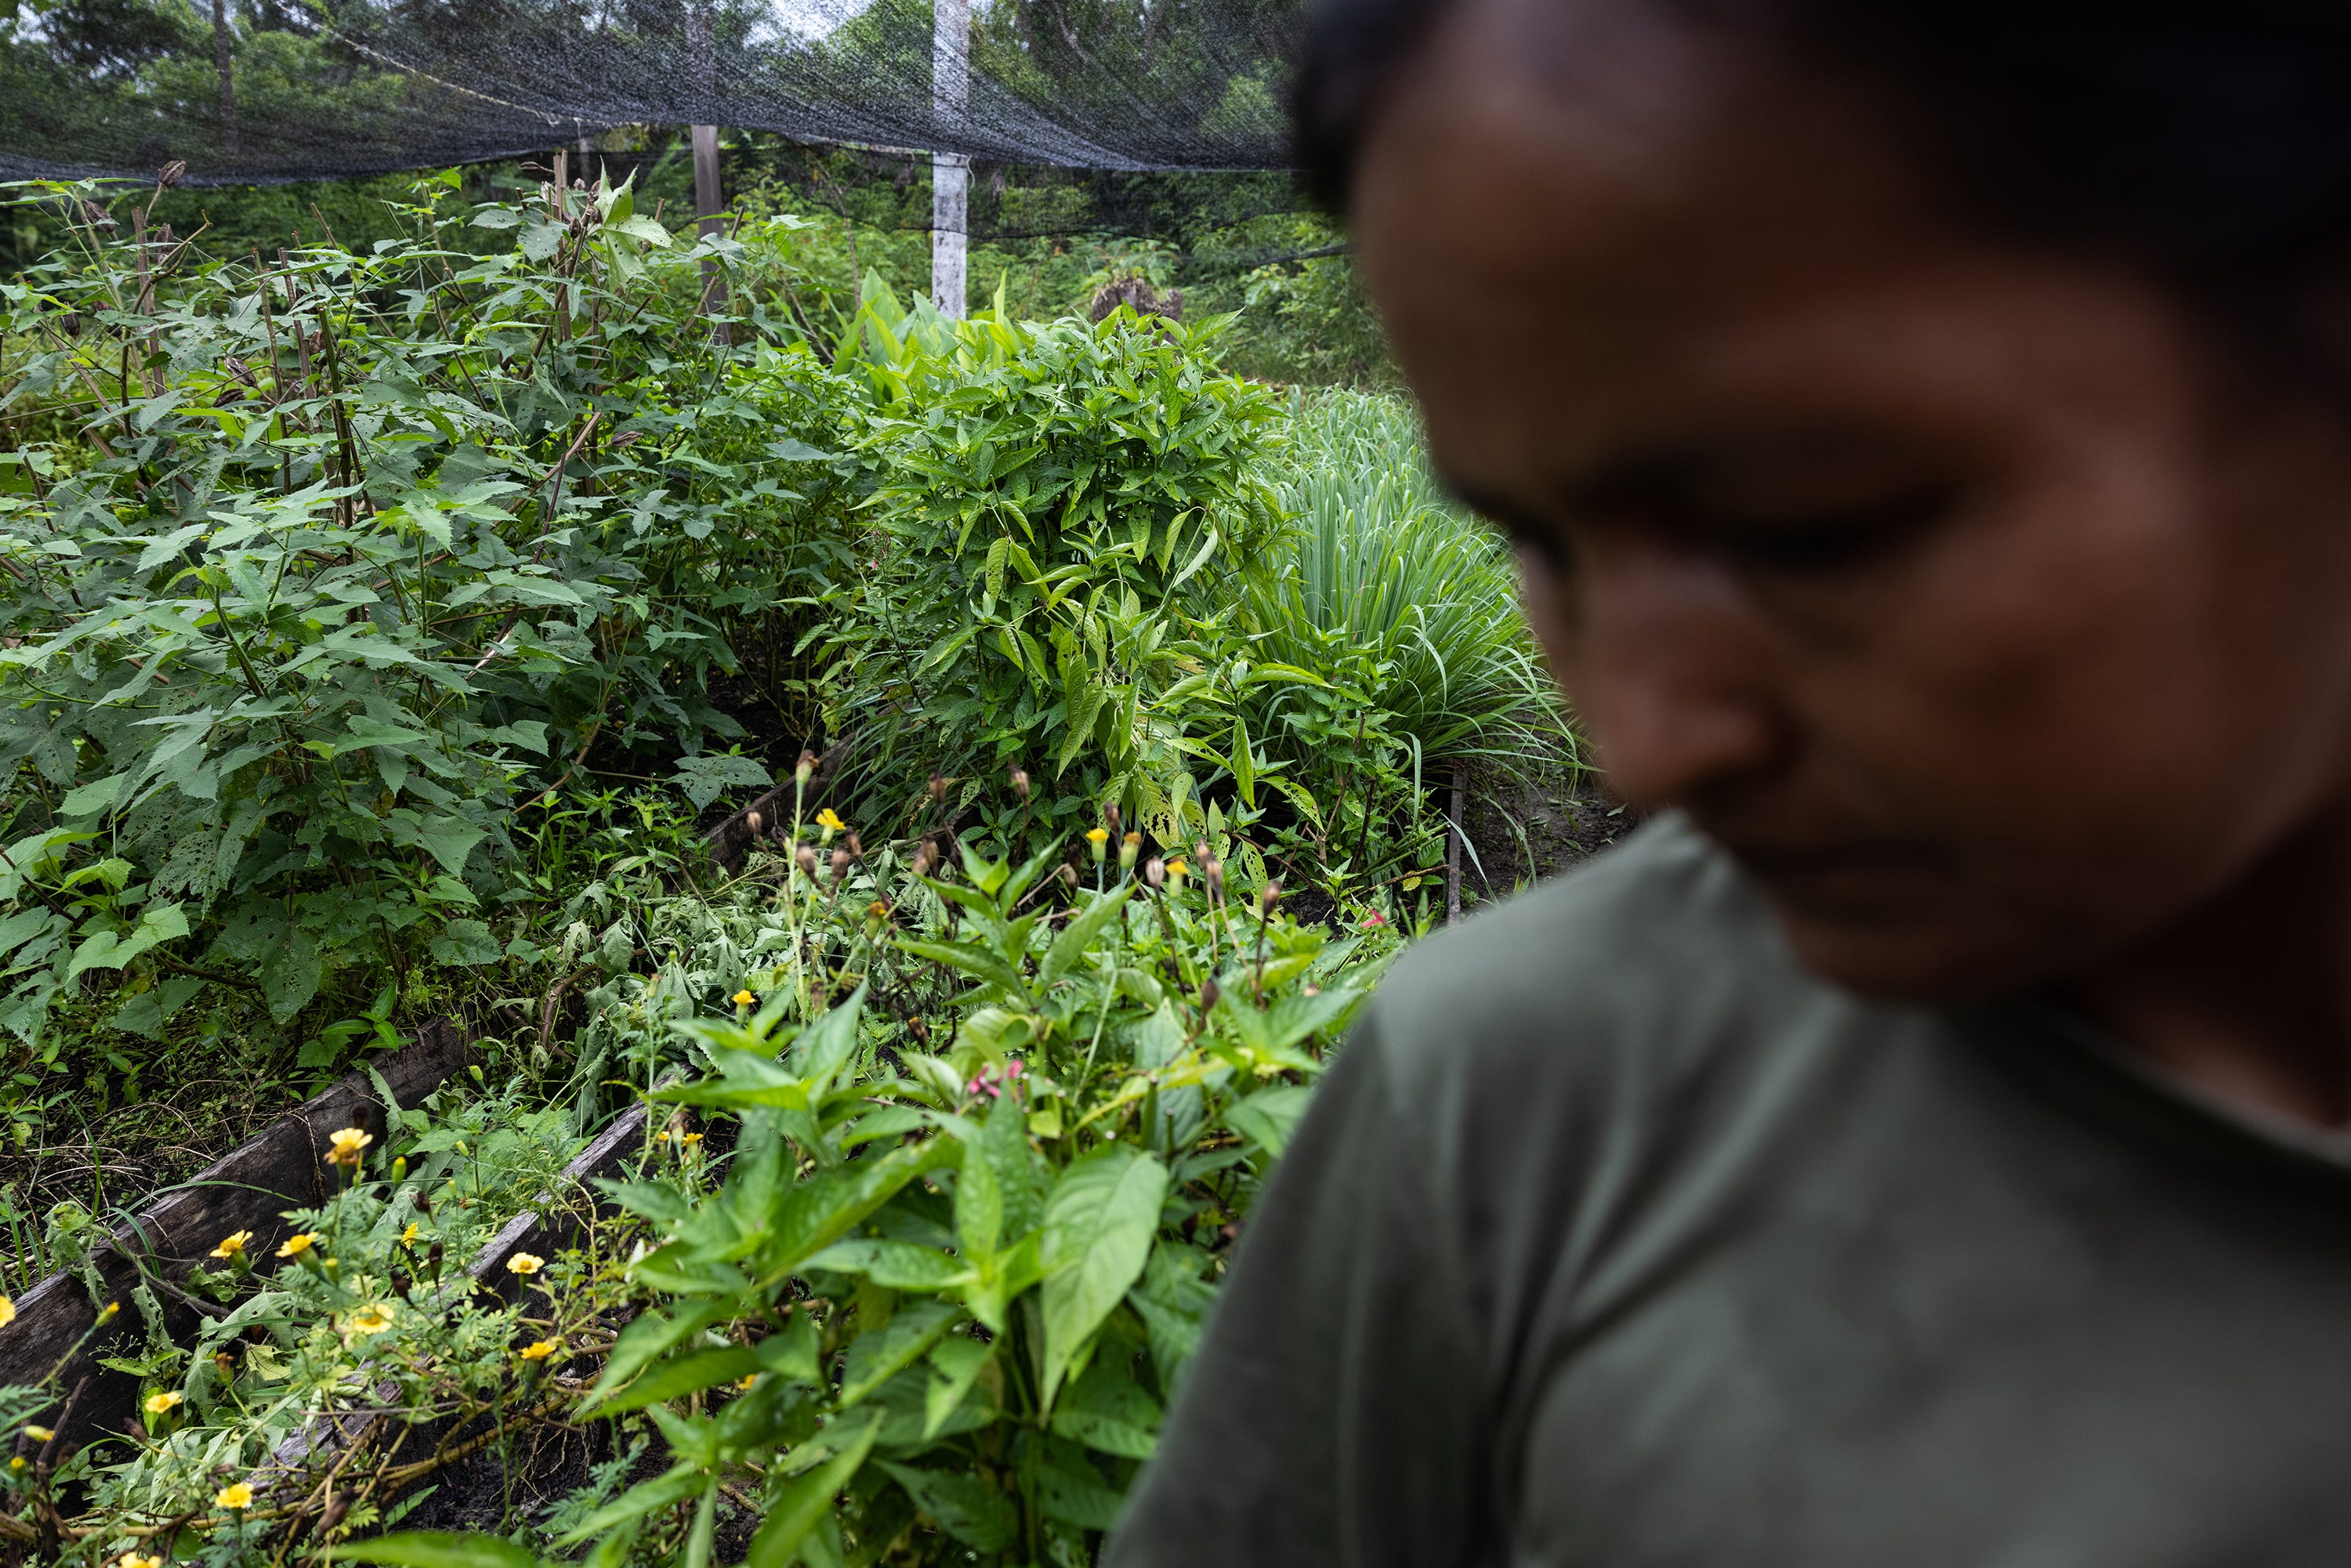 Nallive Parente, 42, together with her community built a "chagra" and a nursery. There, they cultivate the different herbs and plants used in the recipes to prevent and mitigate the symptoms of COVID19 in their community.